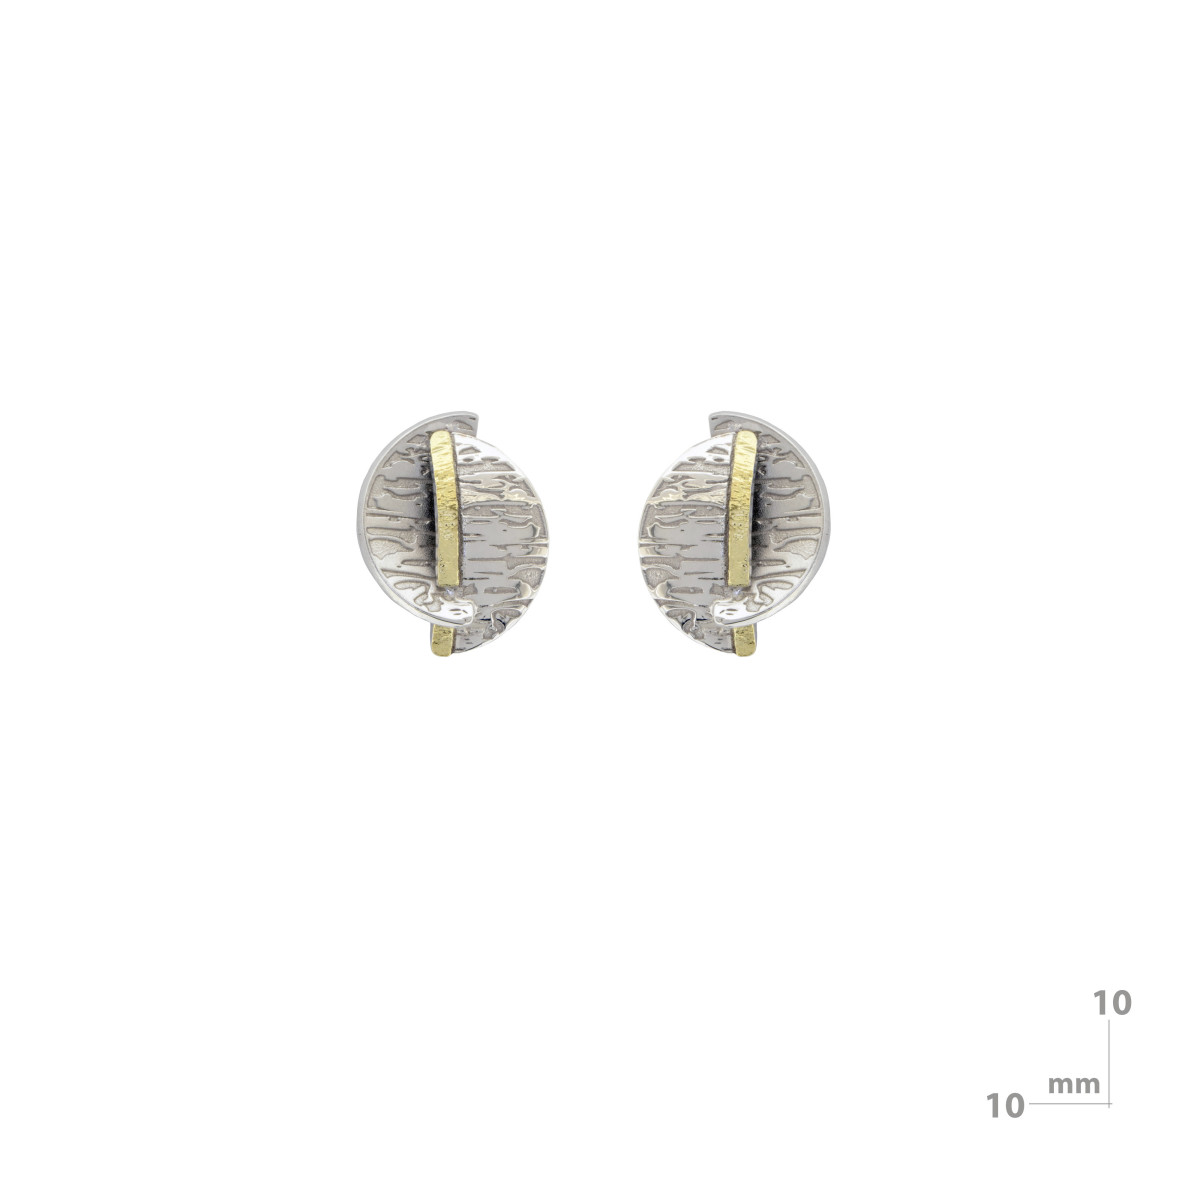 Silver and gold earrings